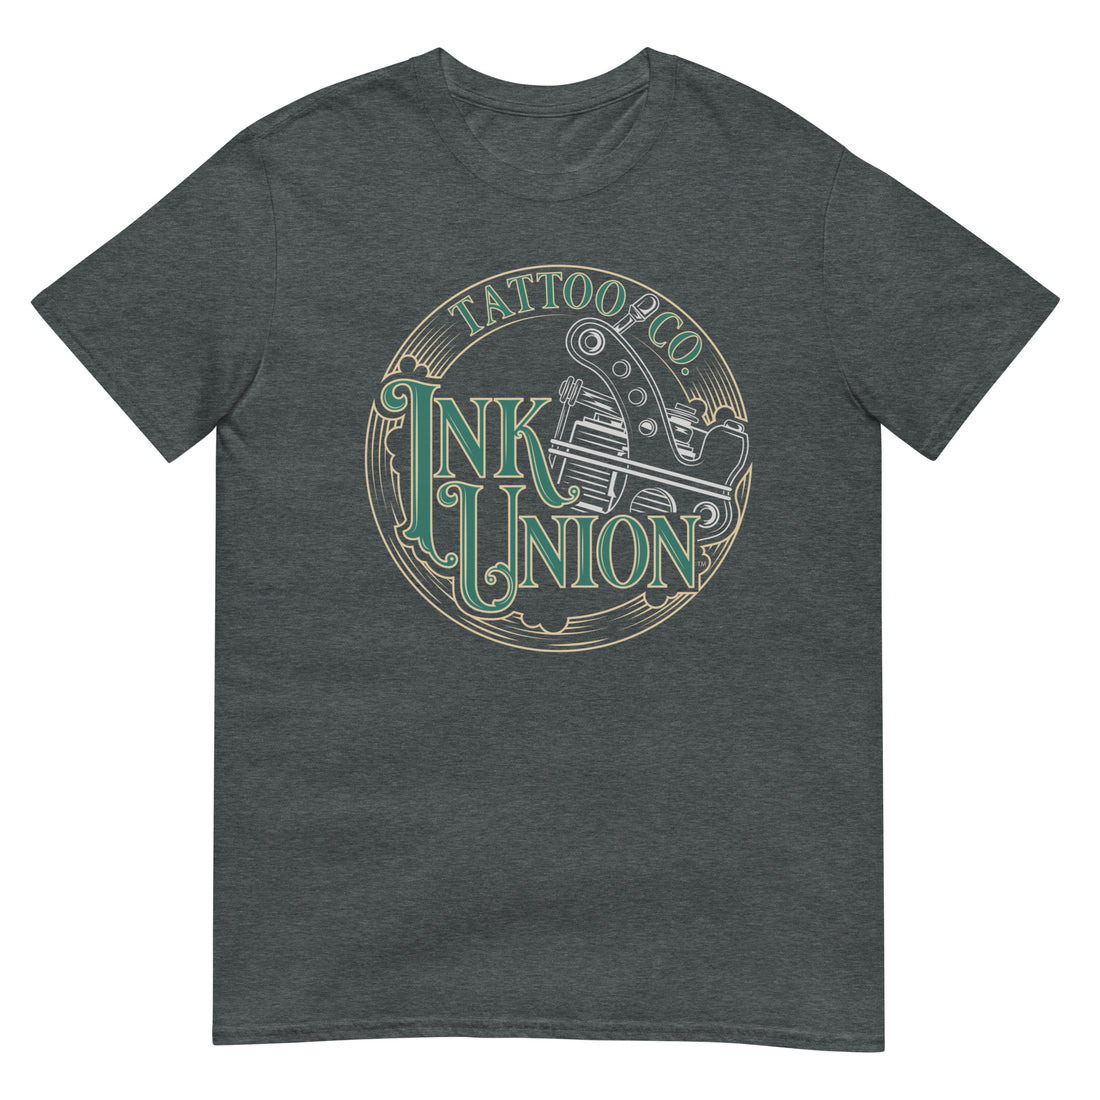 A dark grey t-shirt adorned with the Ink Union Tattoo Co. green and gold with a Silver tattoo machine logo.